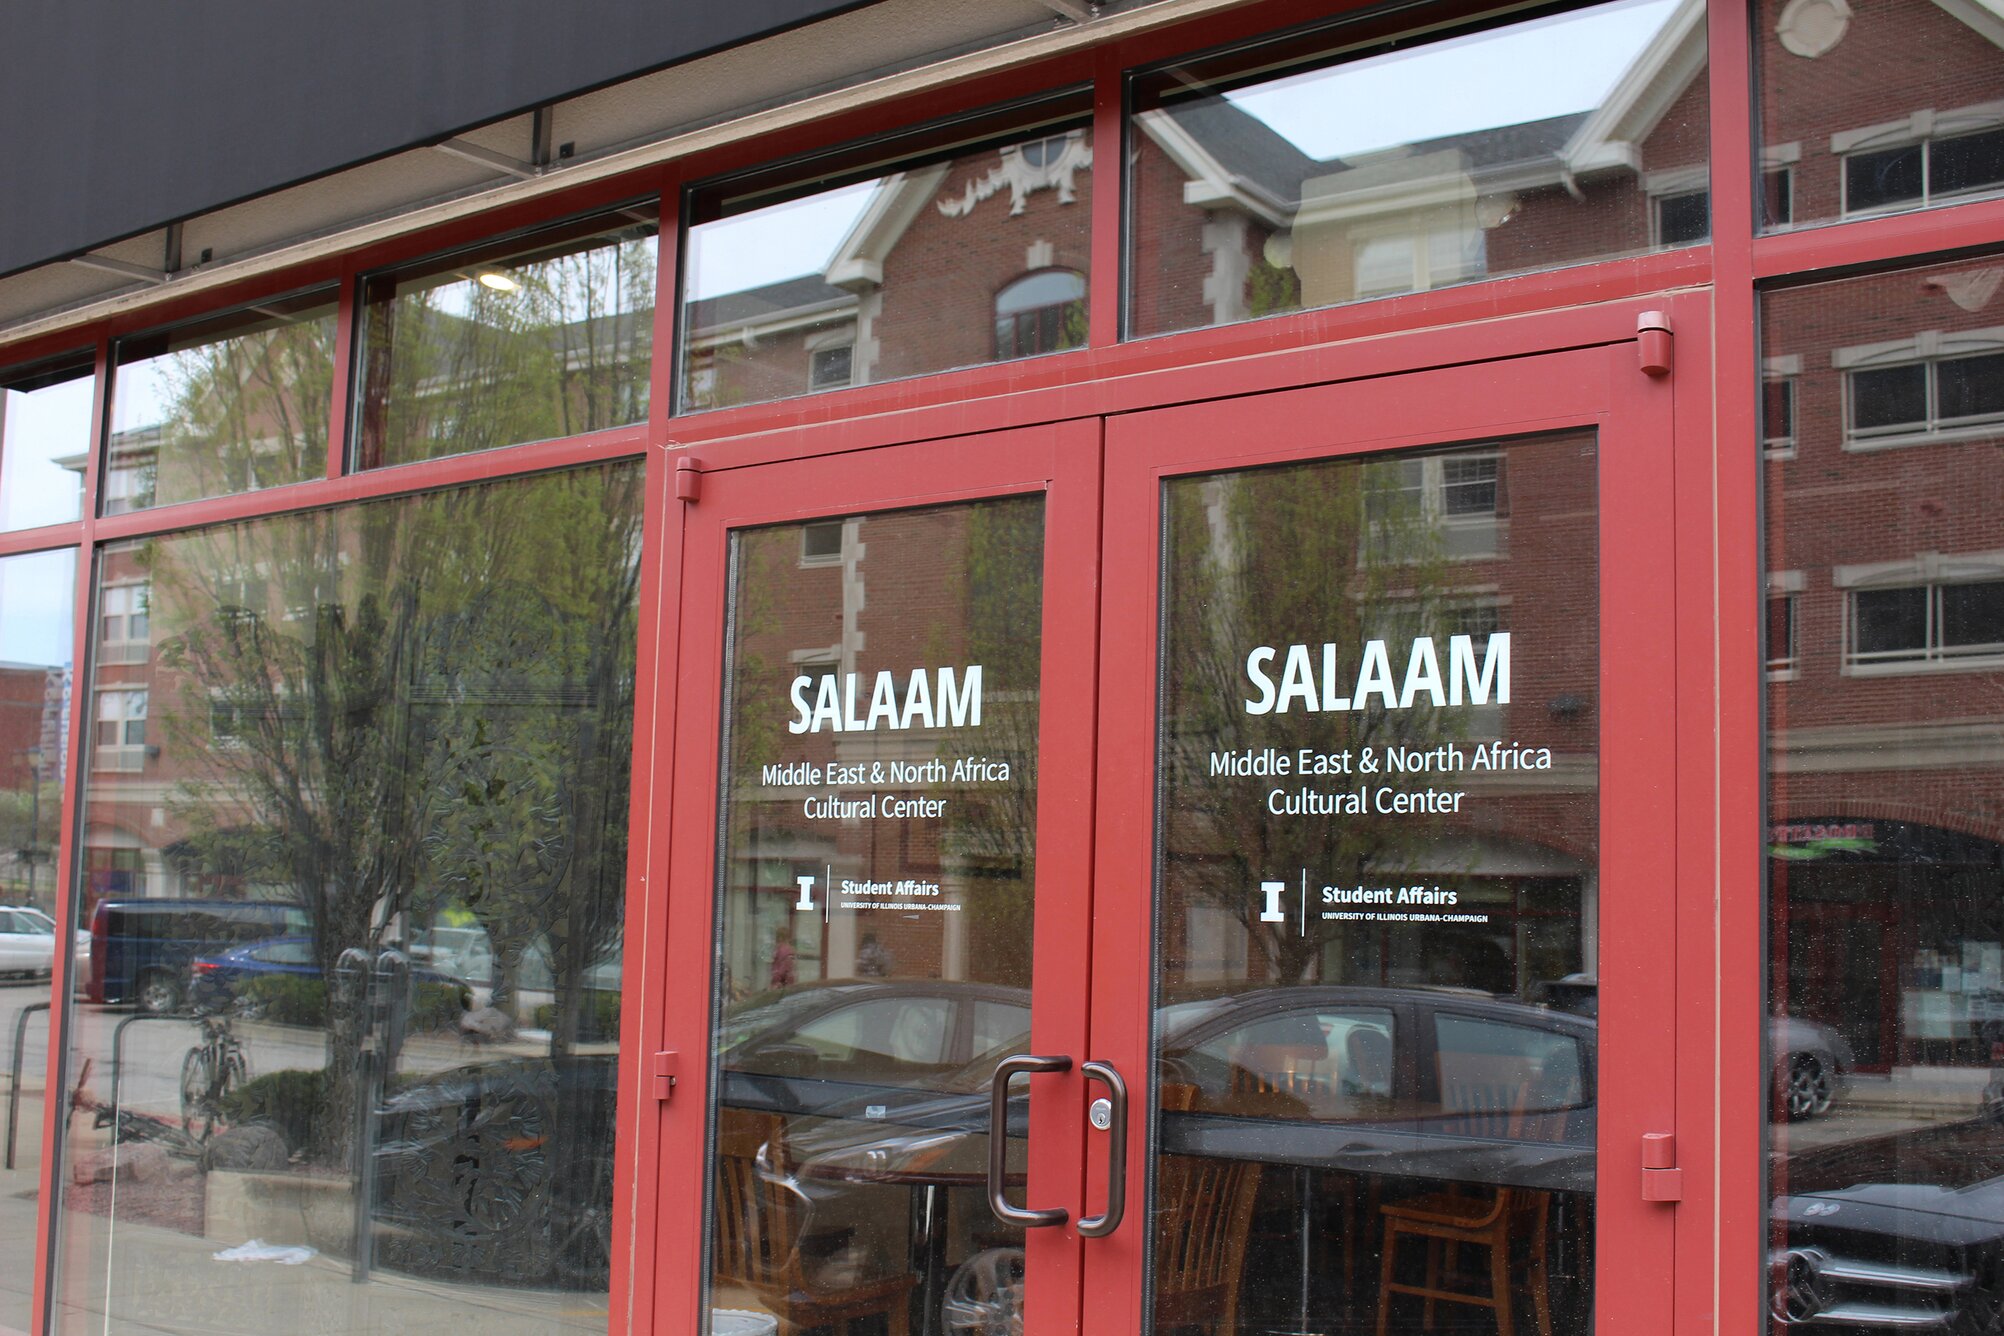 External view of the main entrance doors to the Salaam MENA Cultural Center with reflections in windows